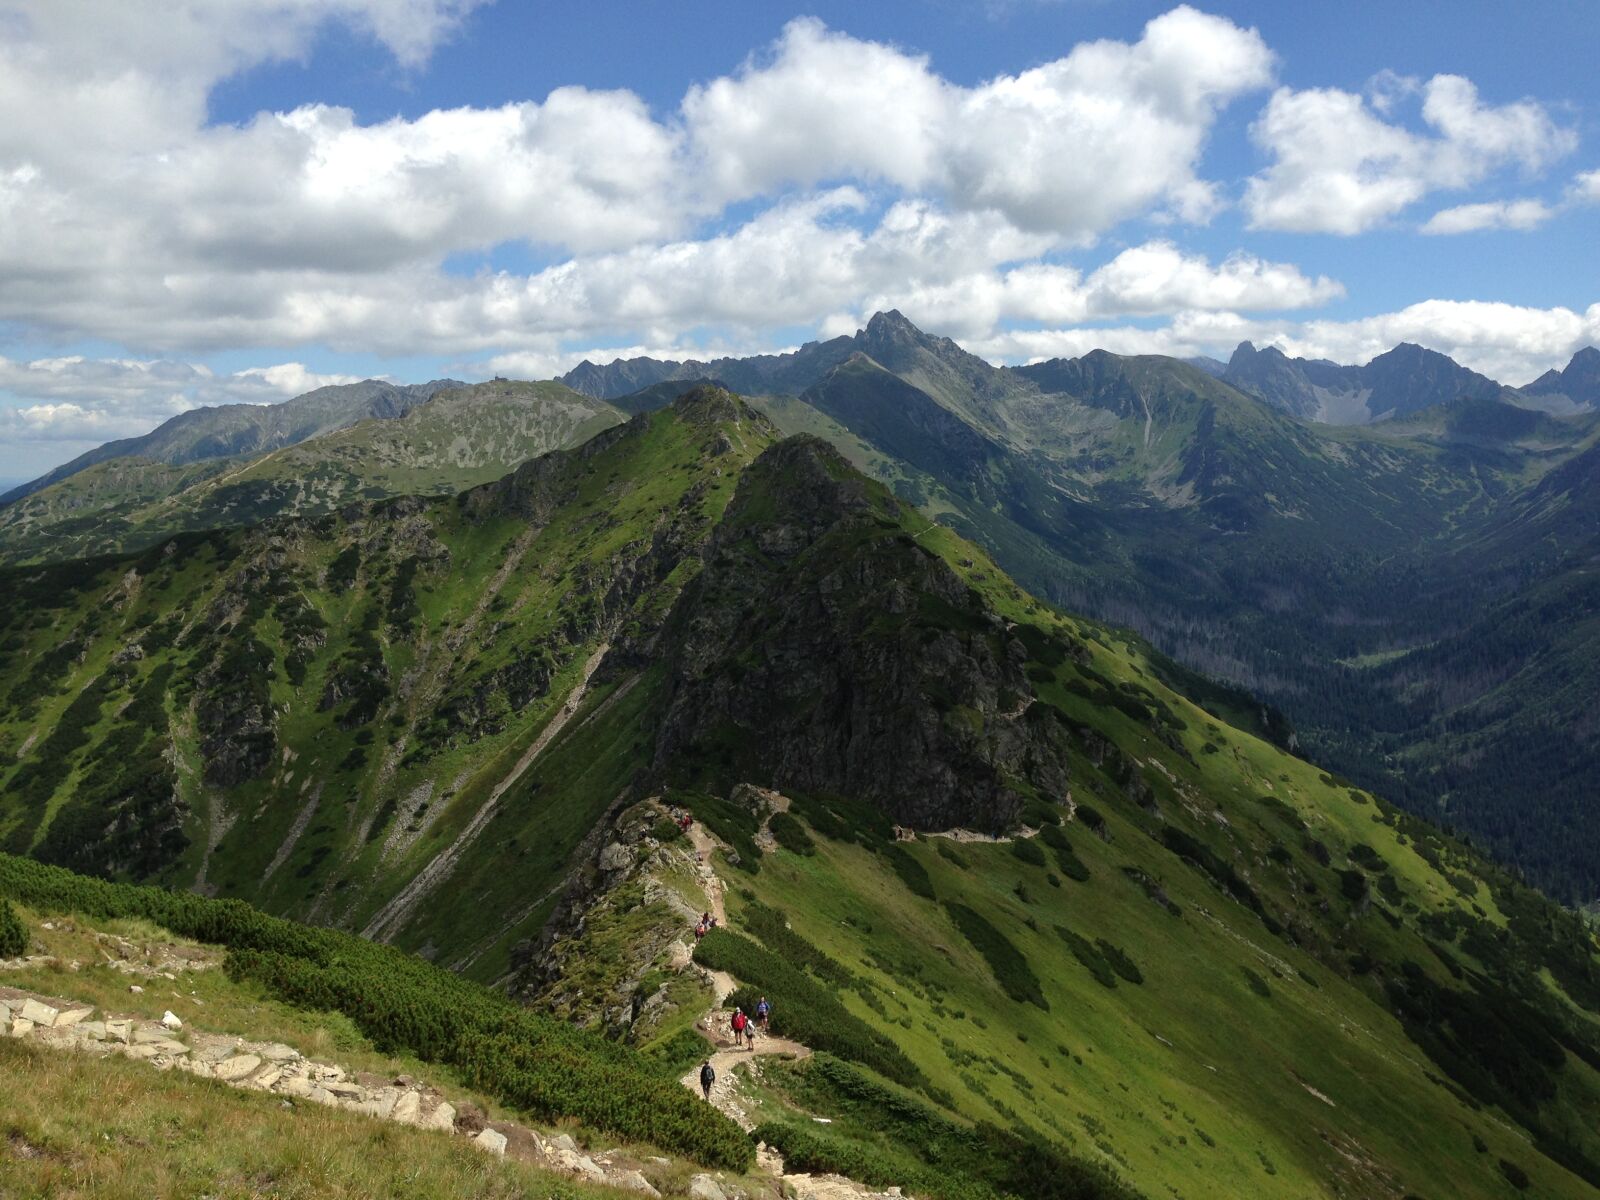 Apple iPhone 5c sample photo. Mountains, tatry, landscape photography